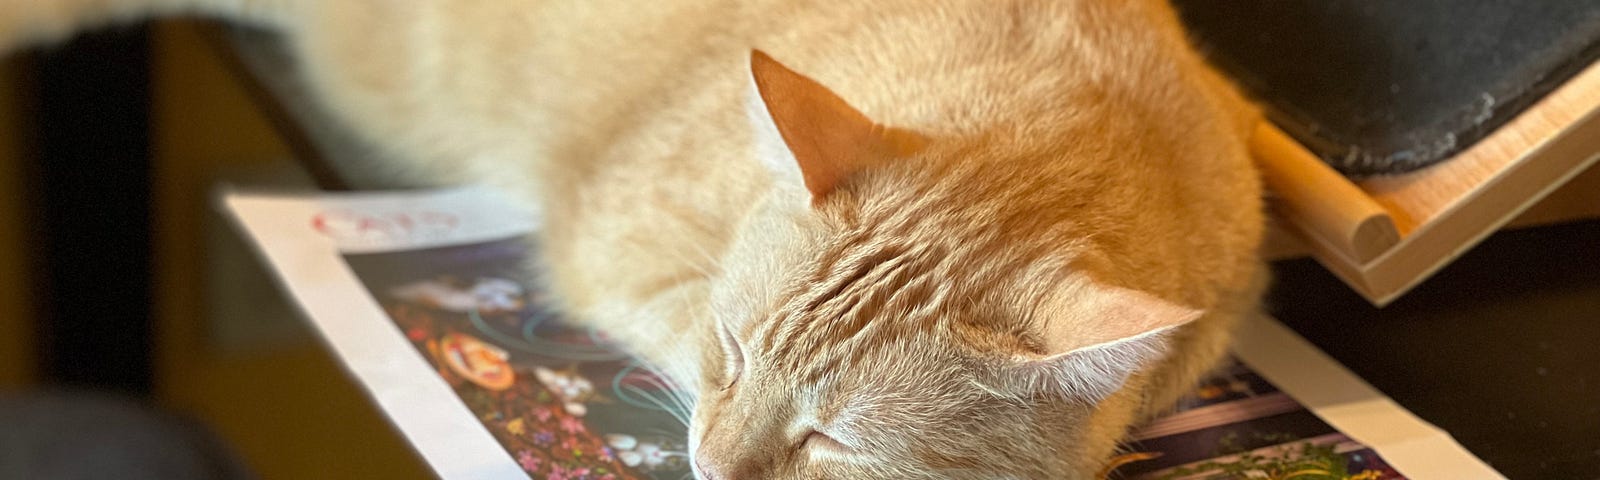 orange tabby cat sleeping on a poster puzzle on top of black table